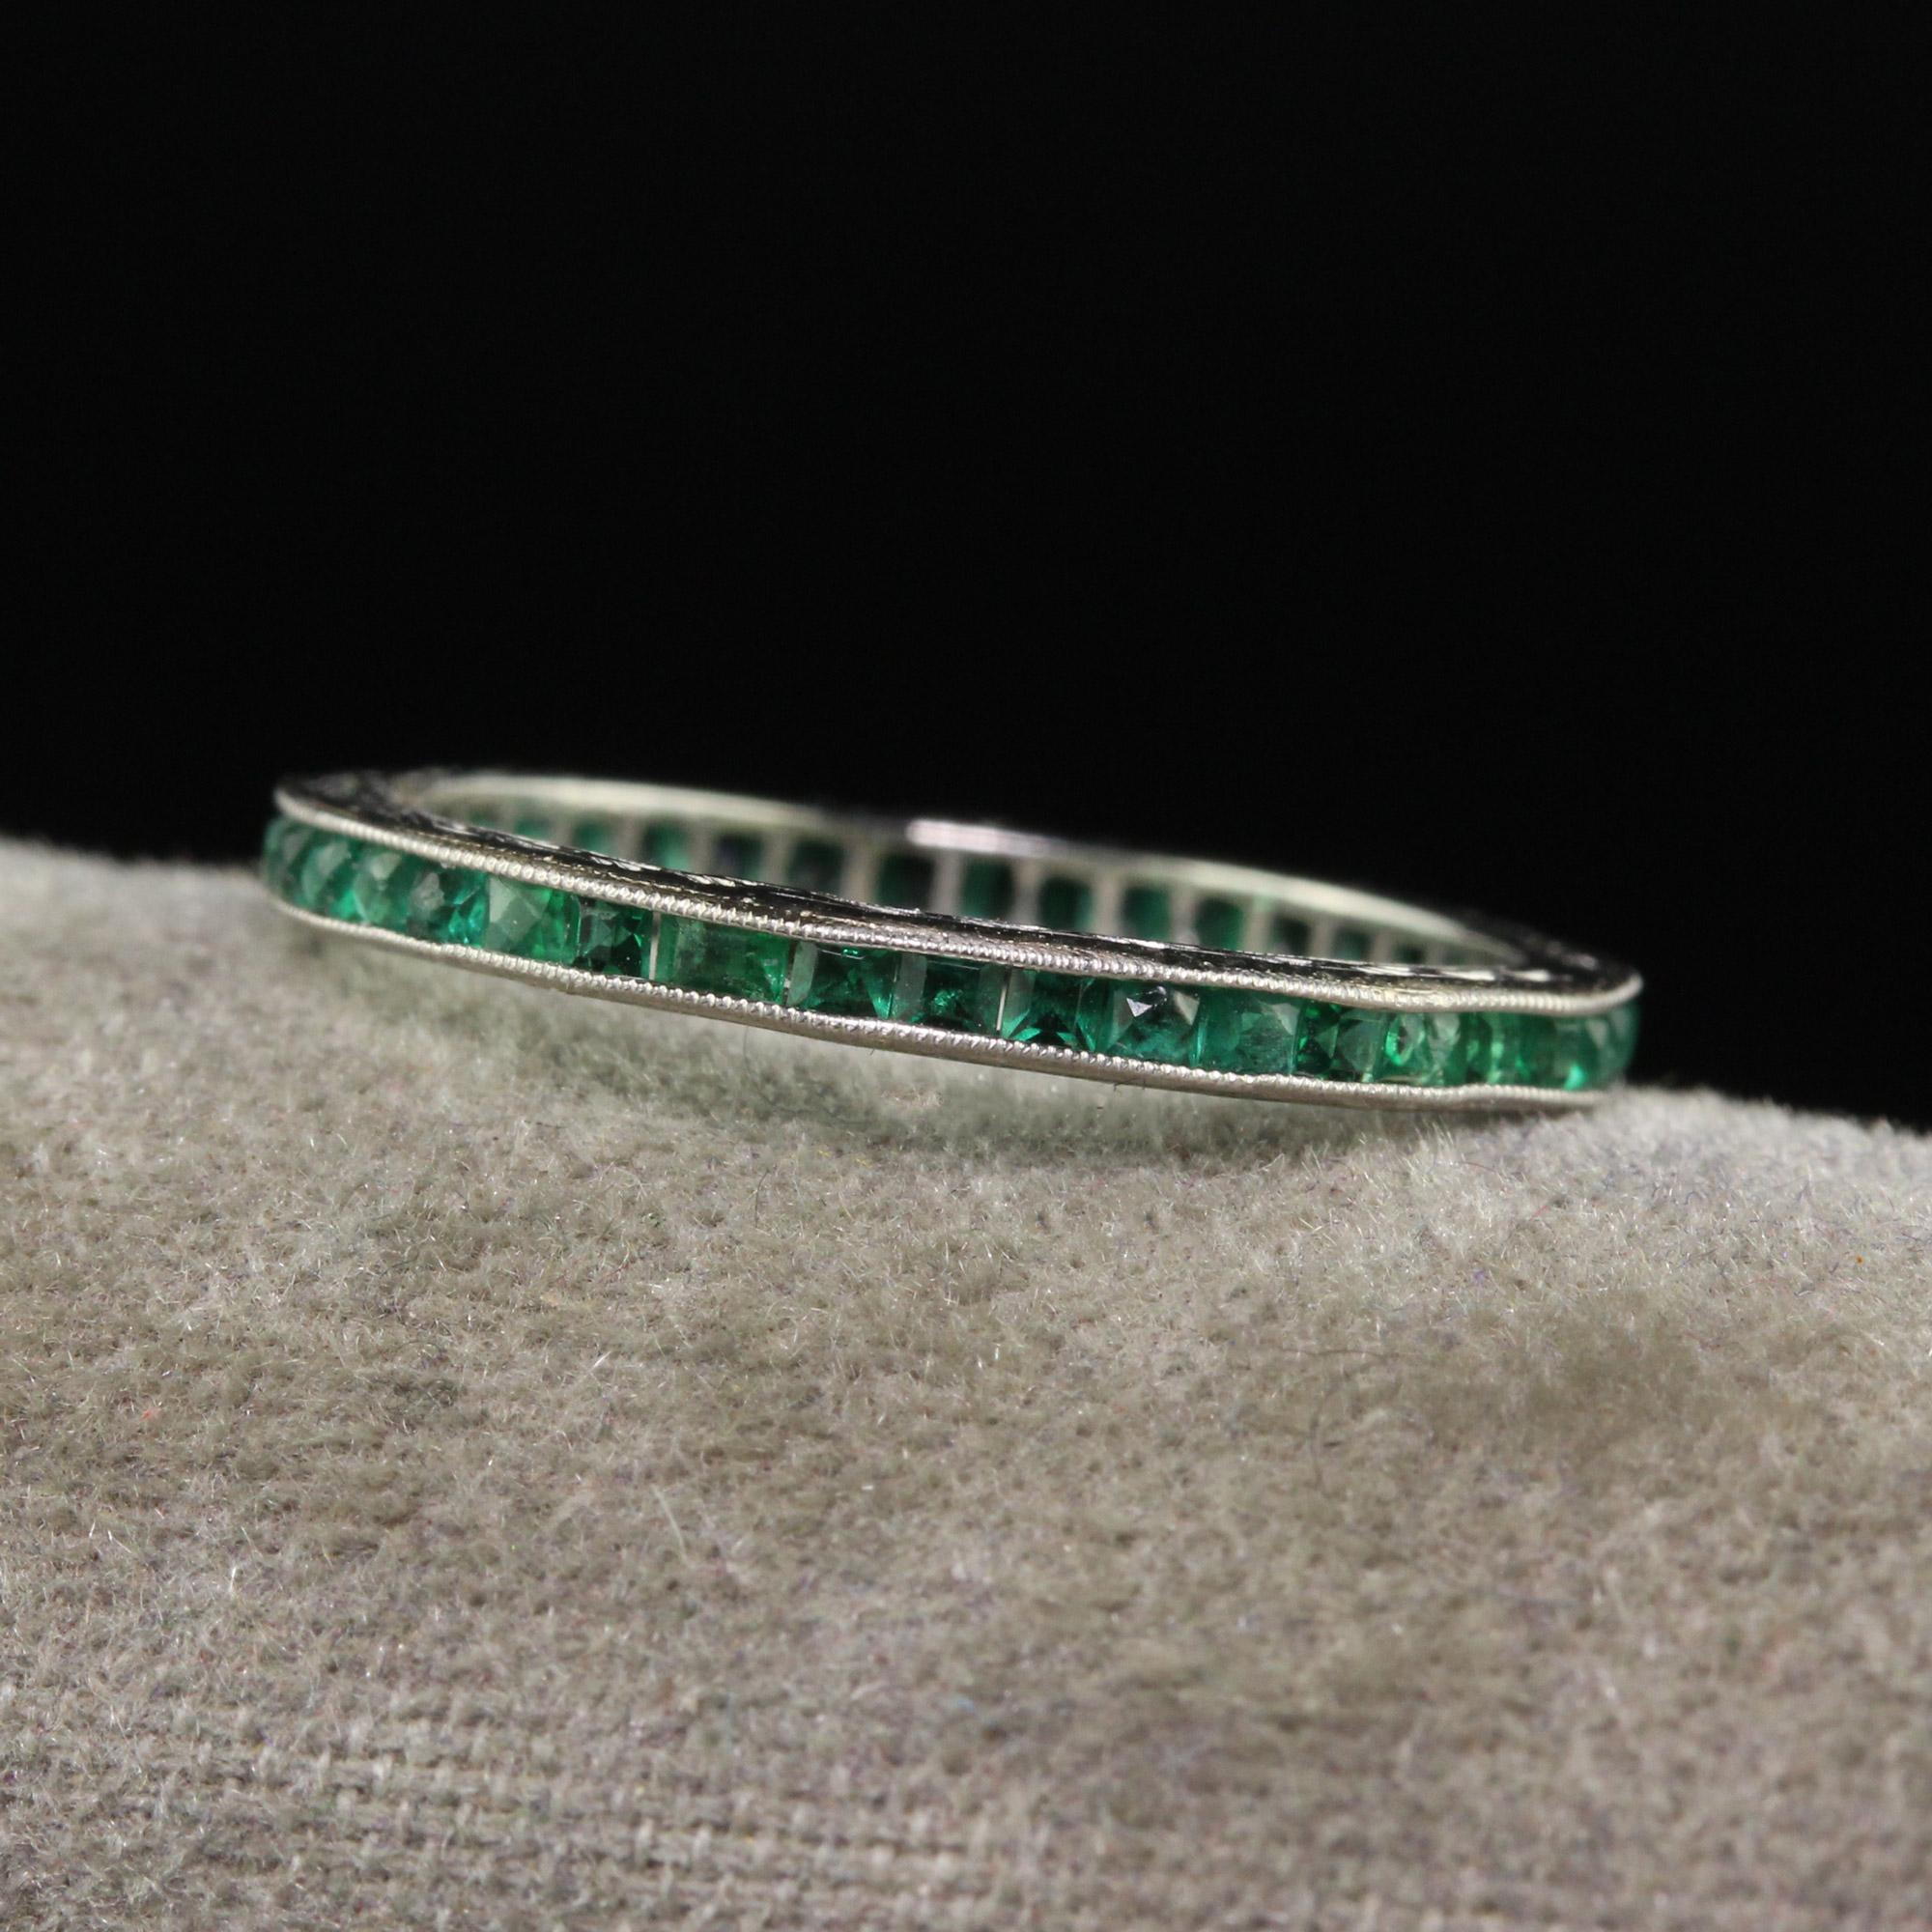 Beautiful Vintage Retro 18K White Gold Square Cut Emerald Engraved Eternity Band - Size 6 1/2. This beautiful wedding band is crafted in 18k white gold. There are a mix of natural and synthetic emeralds in this band going around the entire ring. The